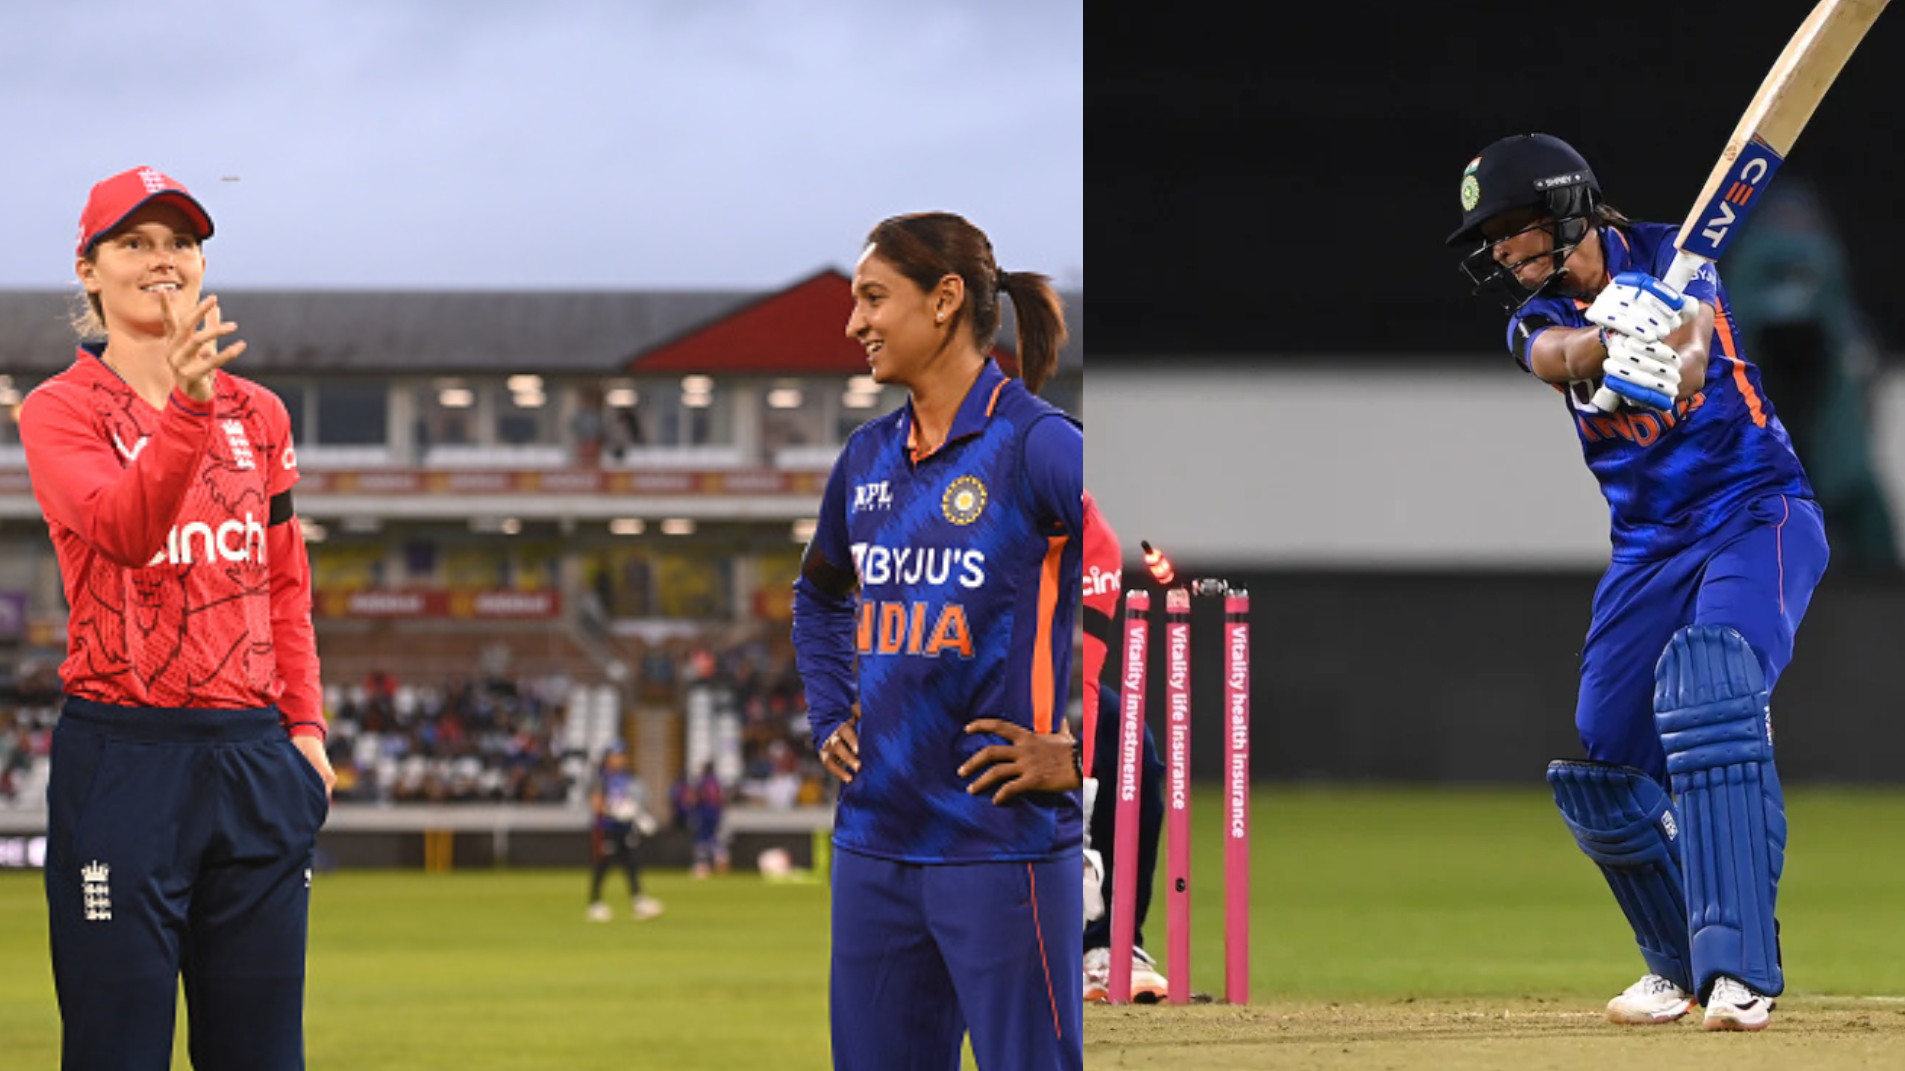 ENGW v INDW 2022: Harmanpreet Kaur says India played 'forcefully' in wet conditions that were 'not 100%'